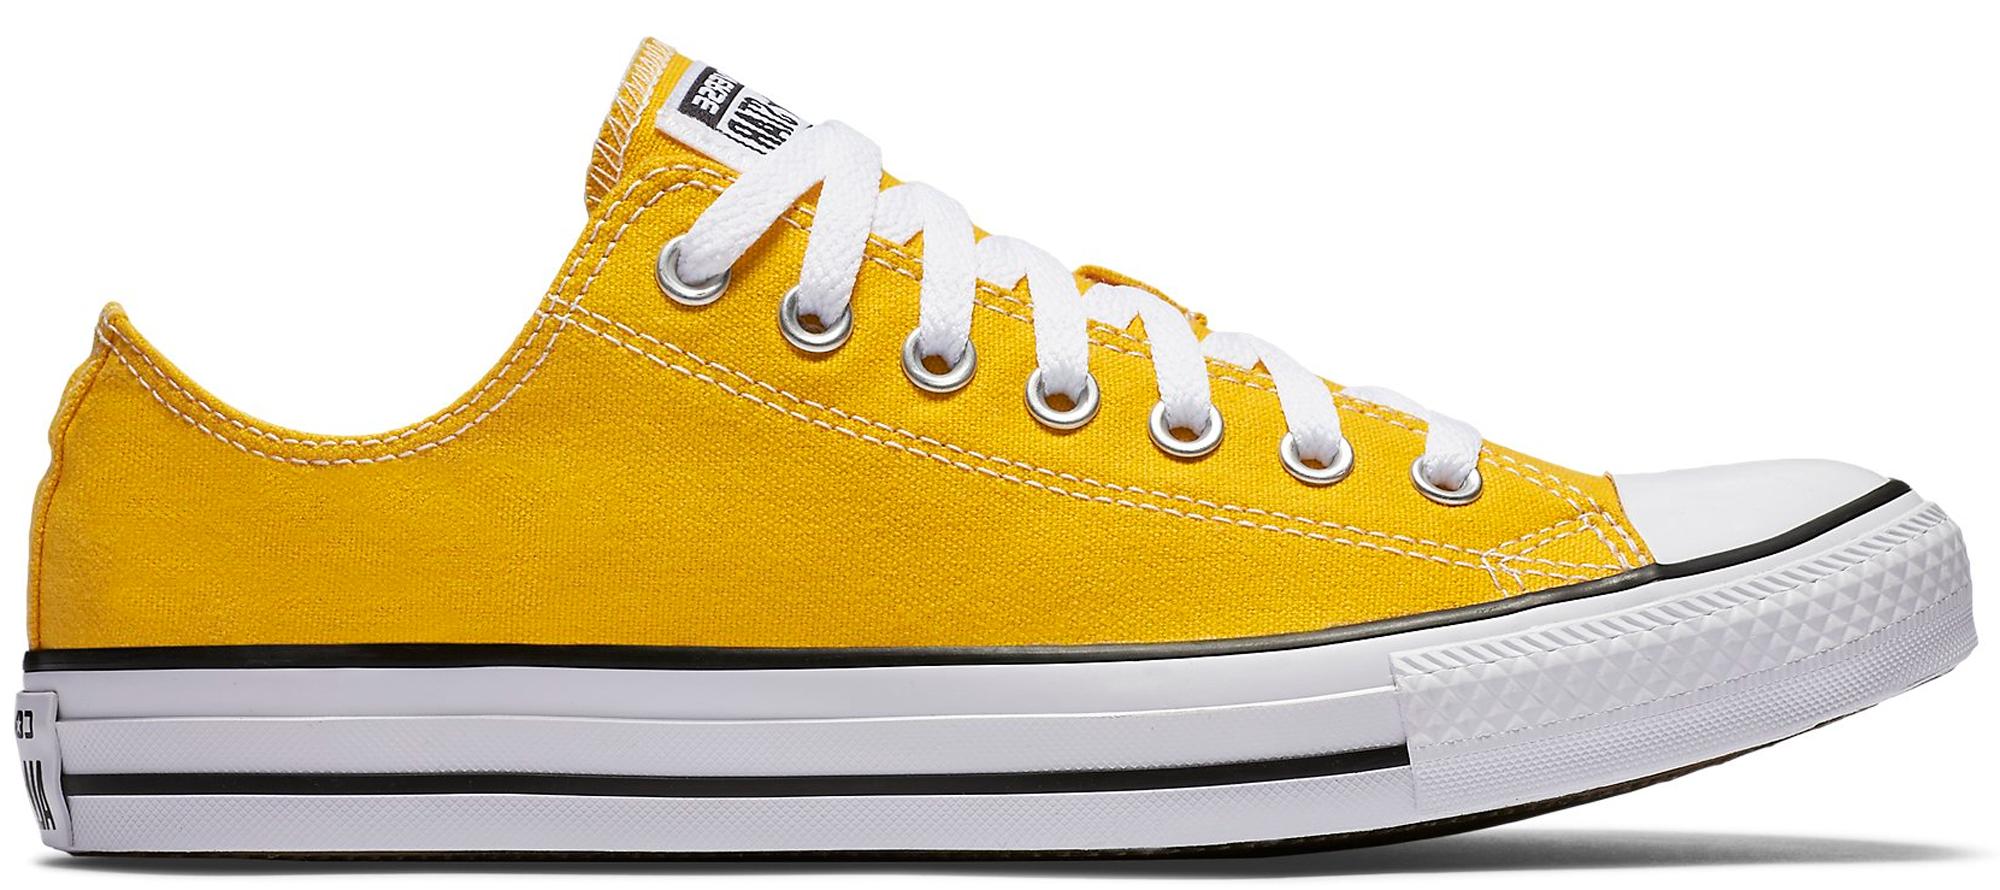 converse all star sunshine yellow youth